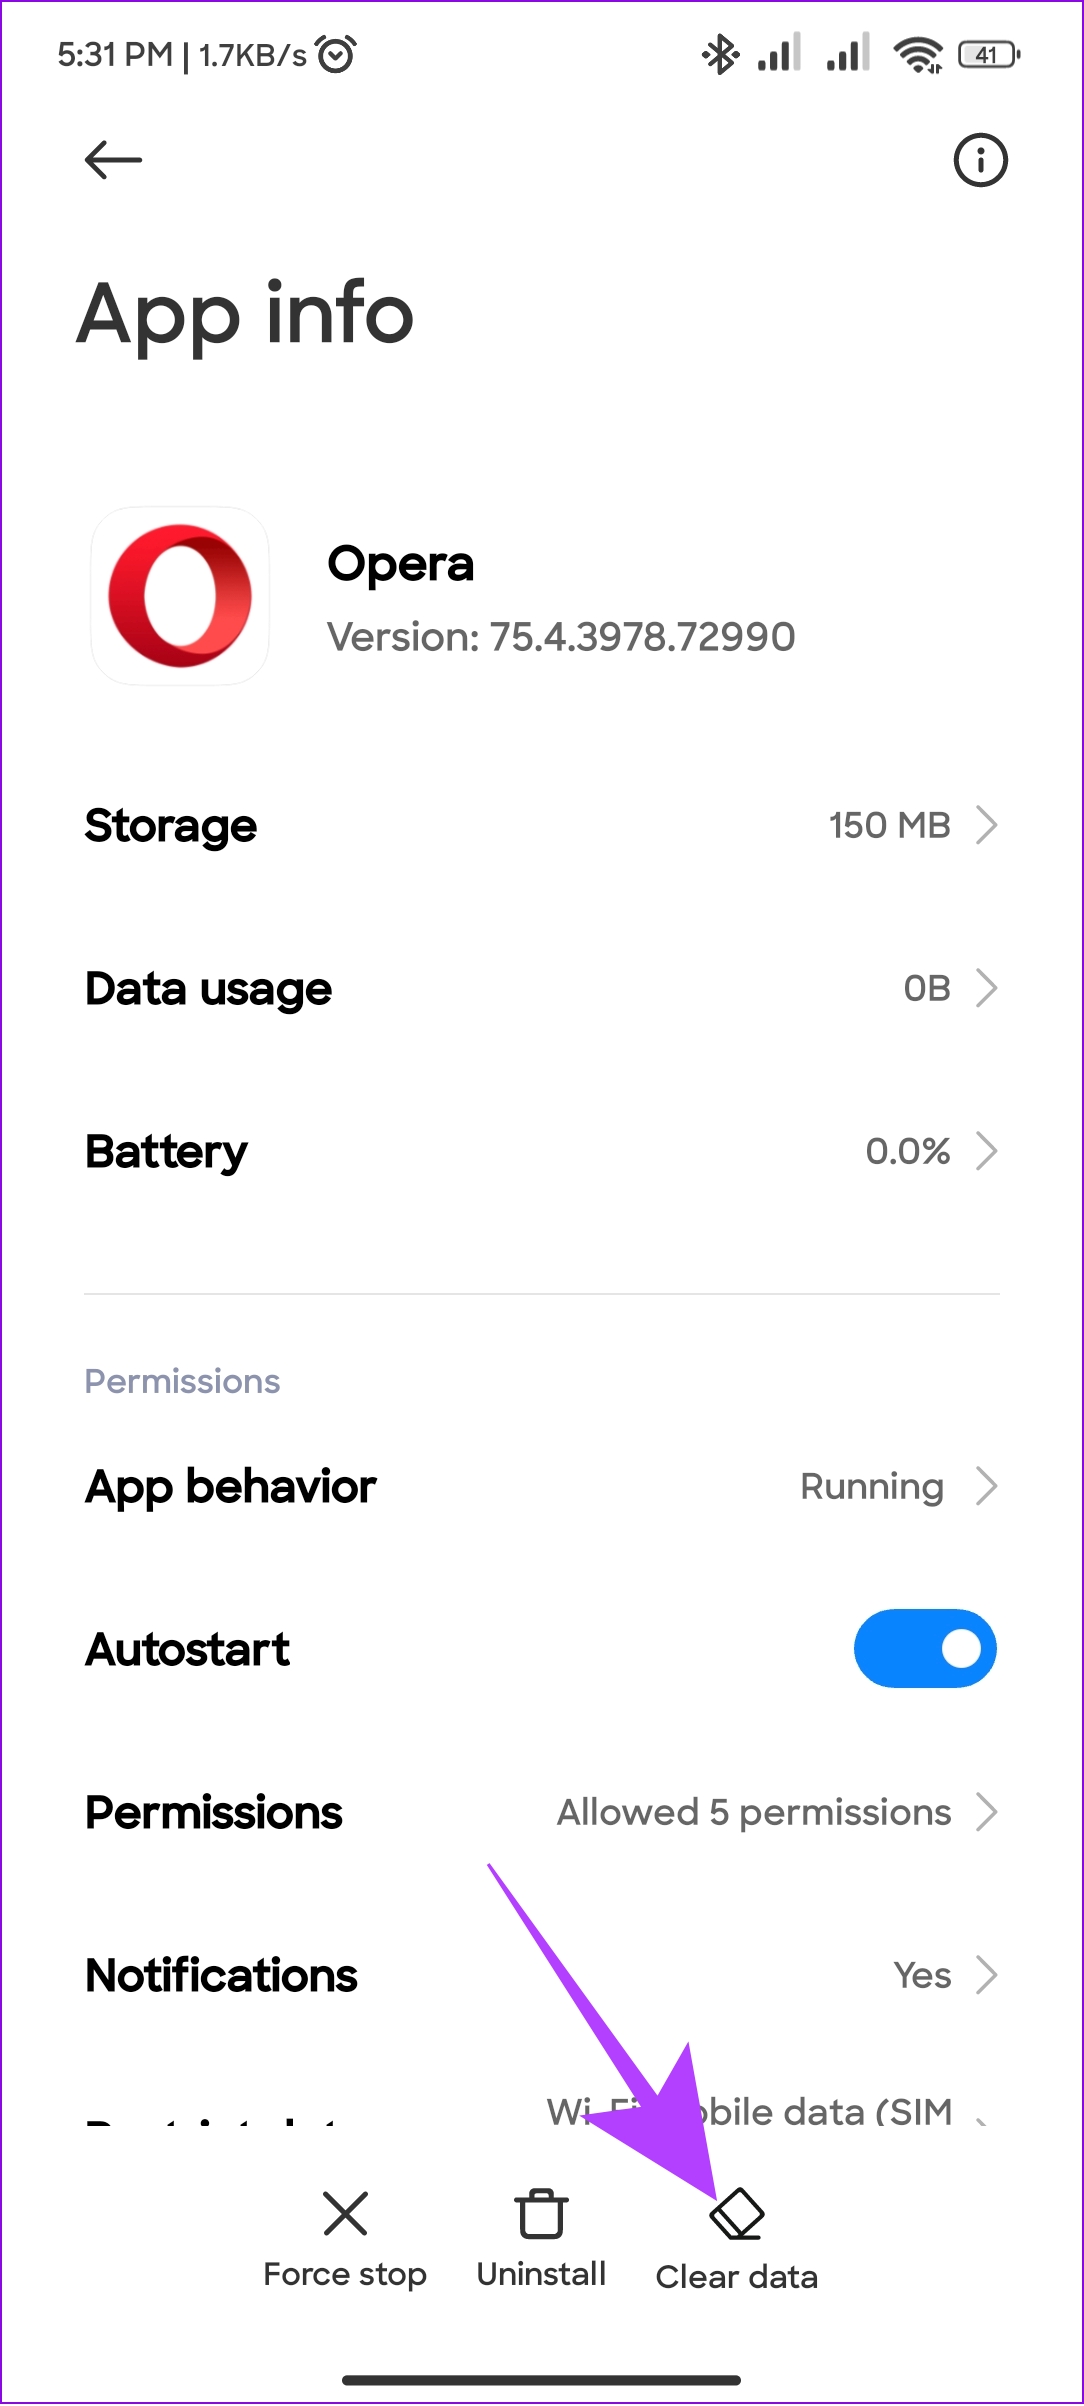 hit clear data on Opera page in settings